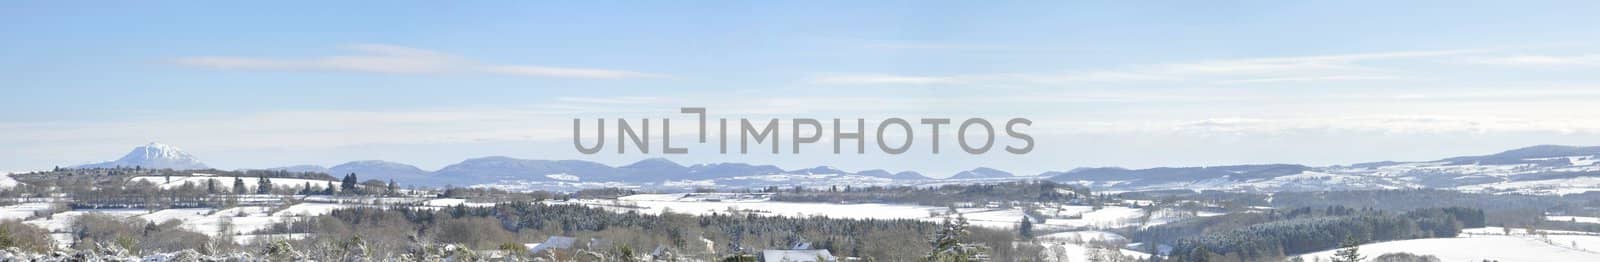 Winter panorama with "Puy-de-dome" mountain in "Auvergne" region in France